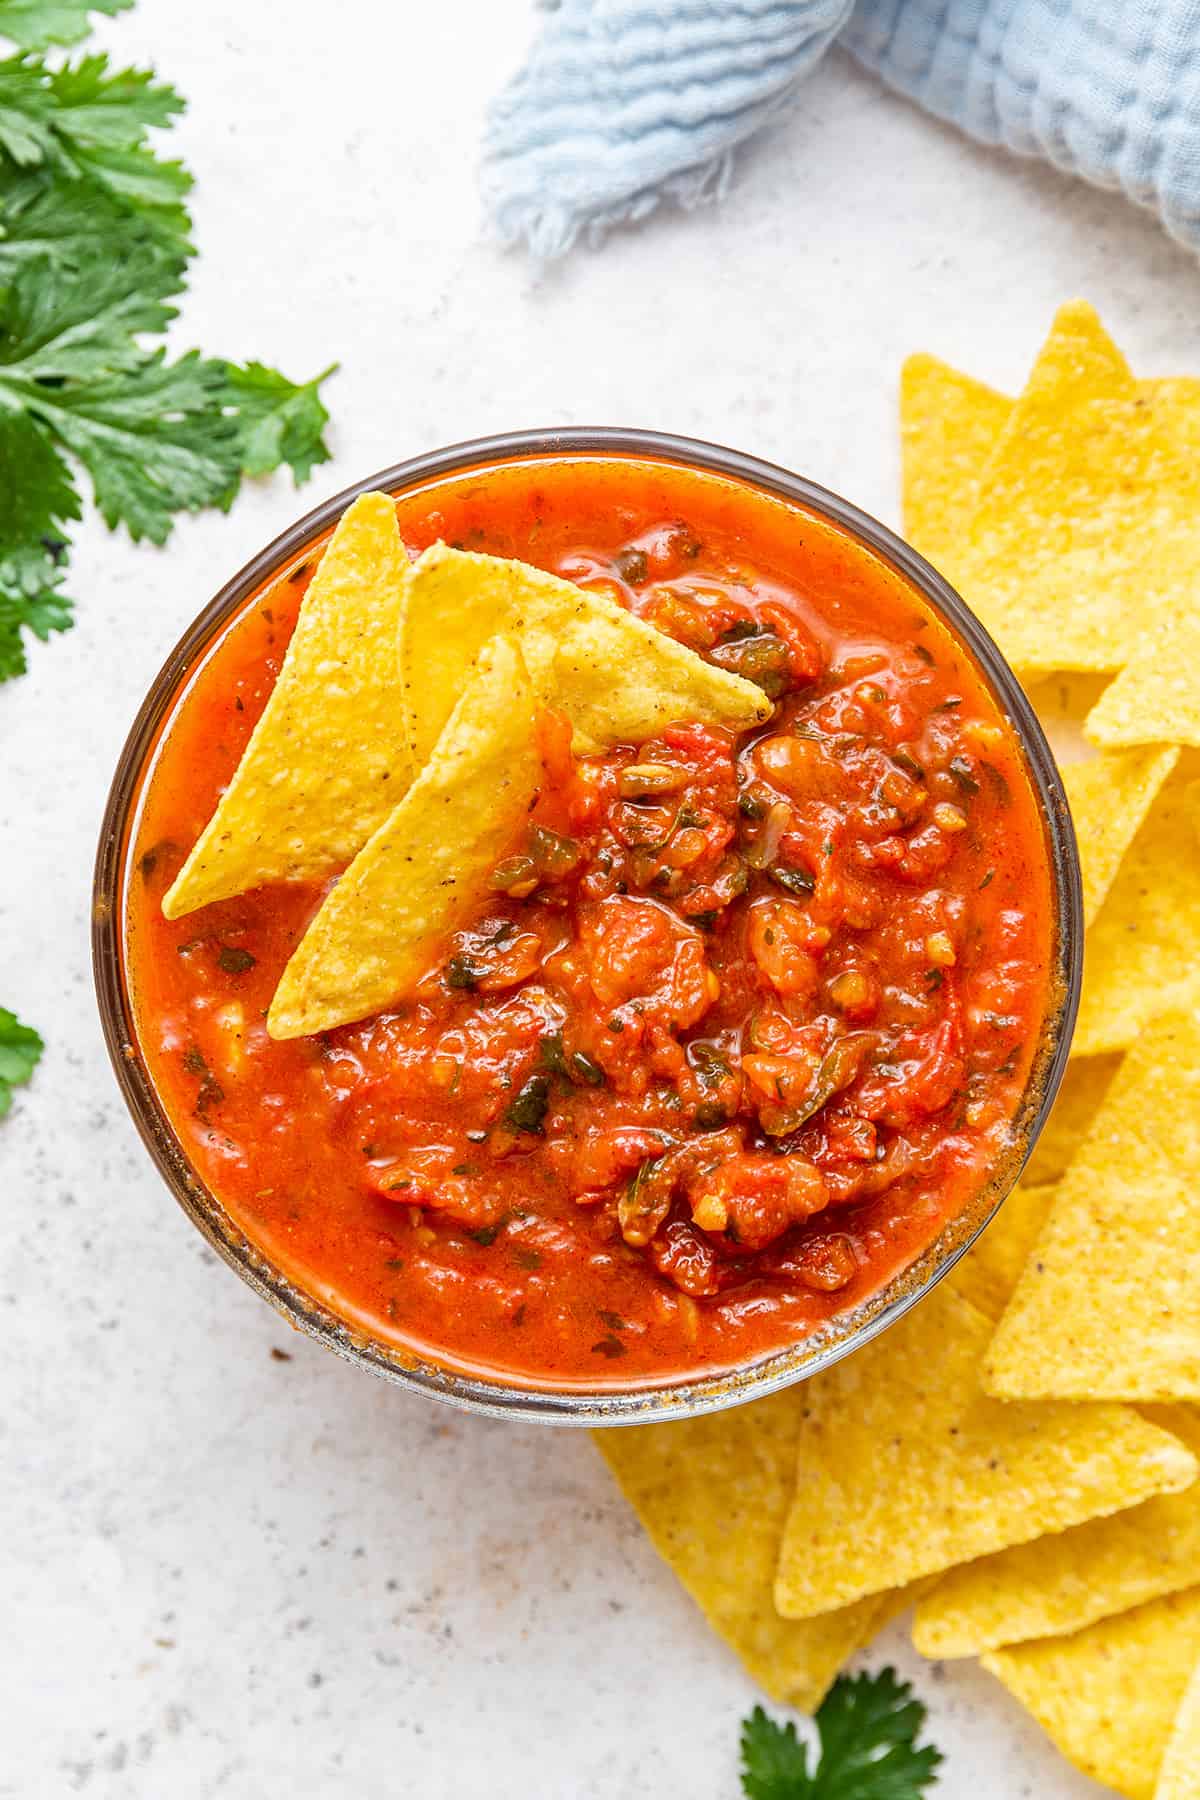 Three tortilla chips in bowl of salsa roja, with additional chips on the side